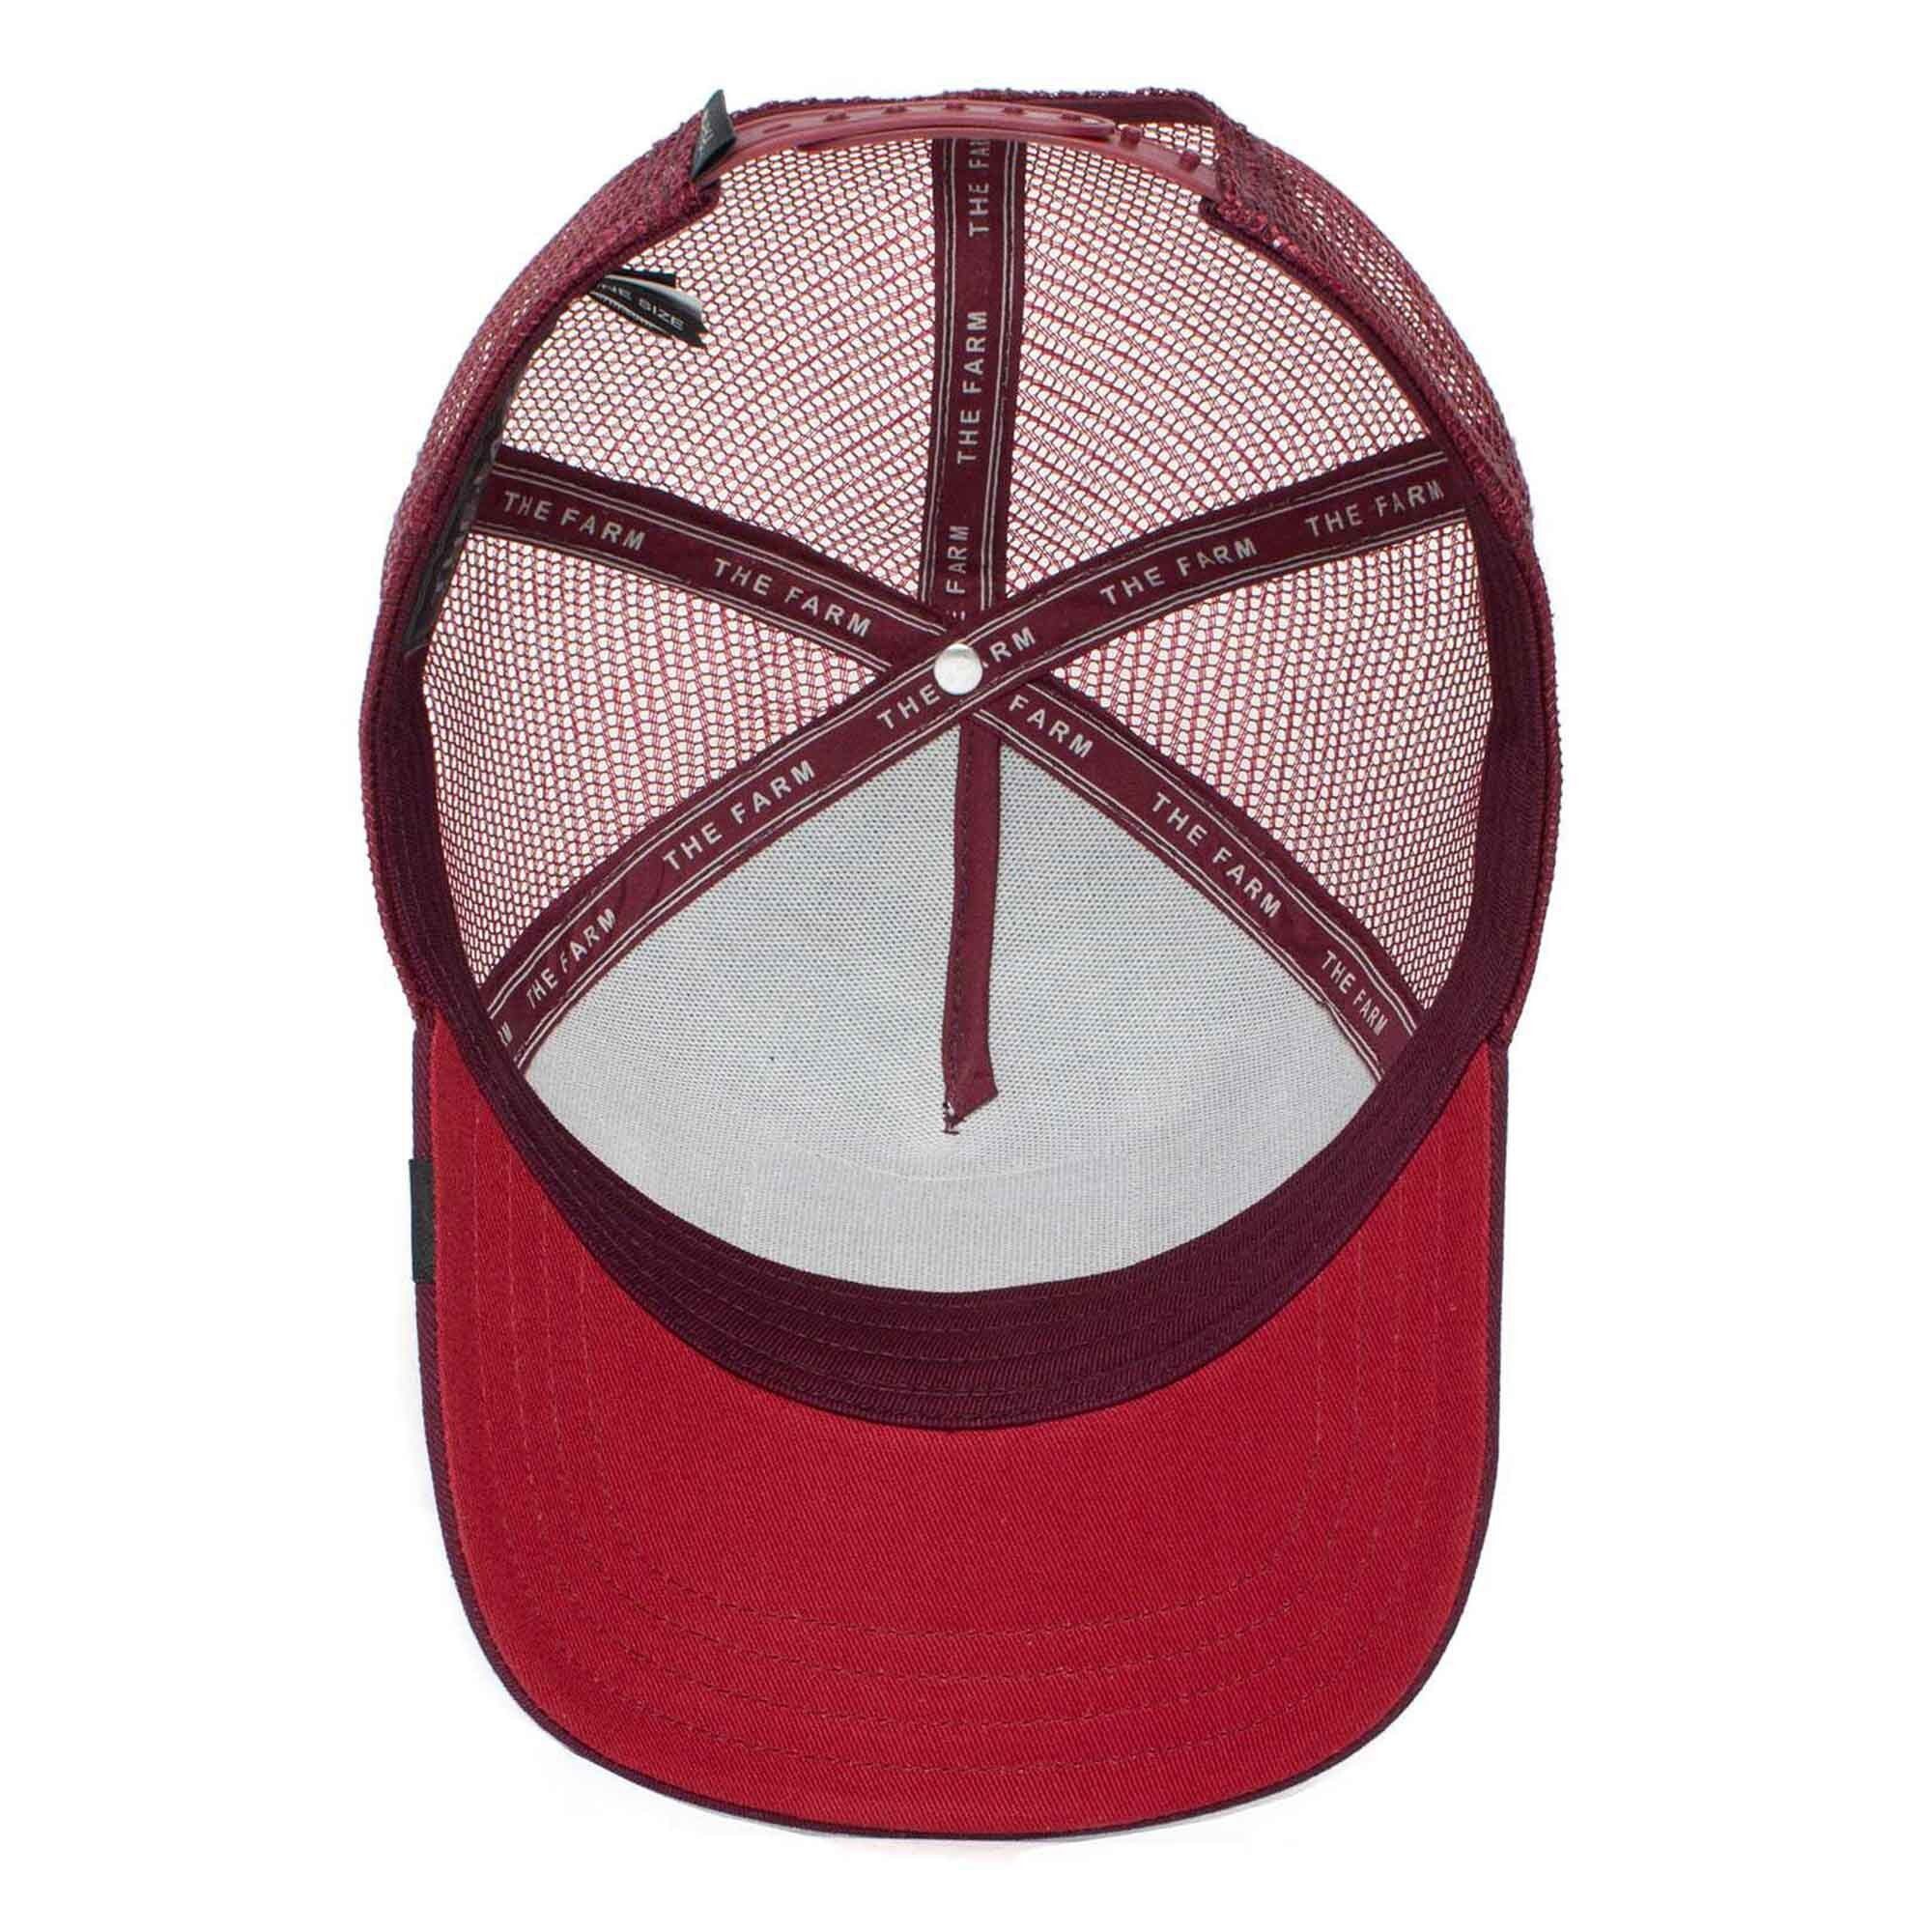 GOORIN Bros. Baseball Trucker Unisex Kappe, One The Panther Cap Cap Frontpatch, - Size maroon